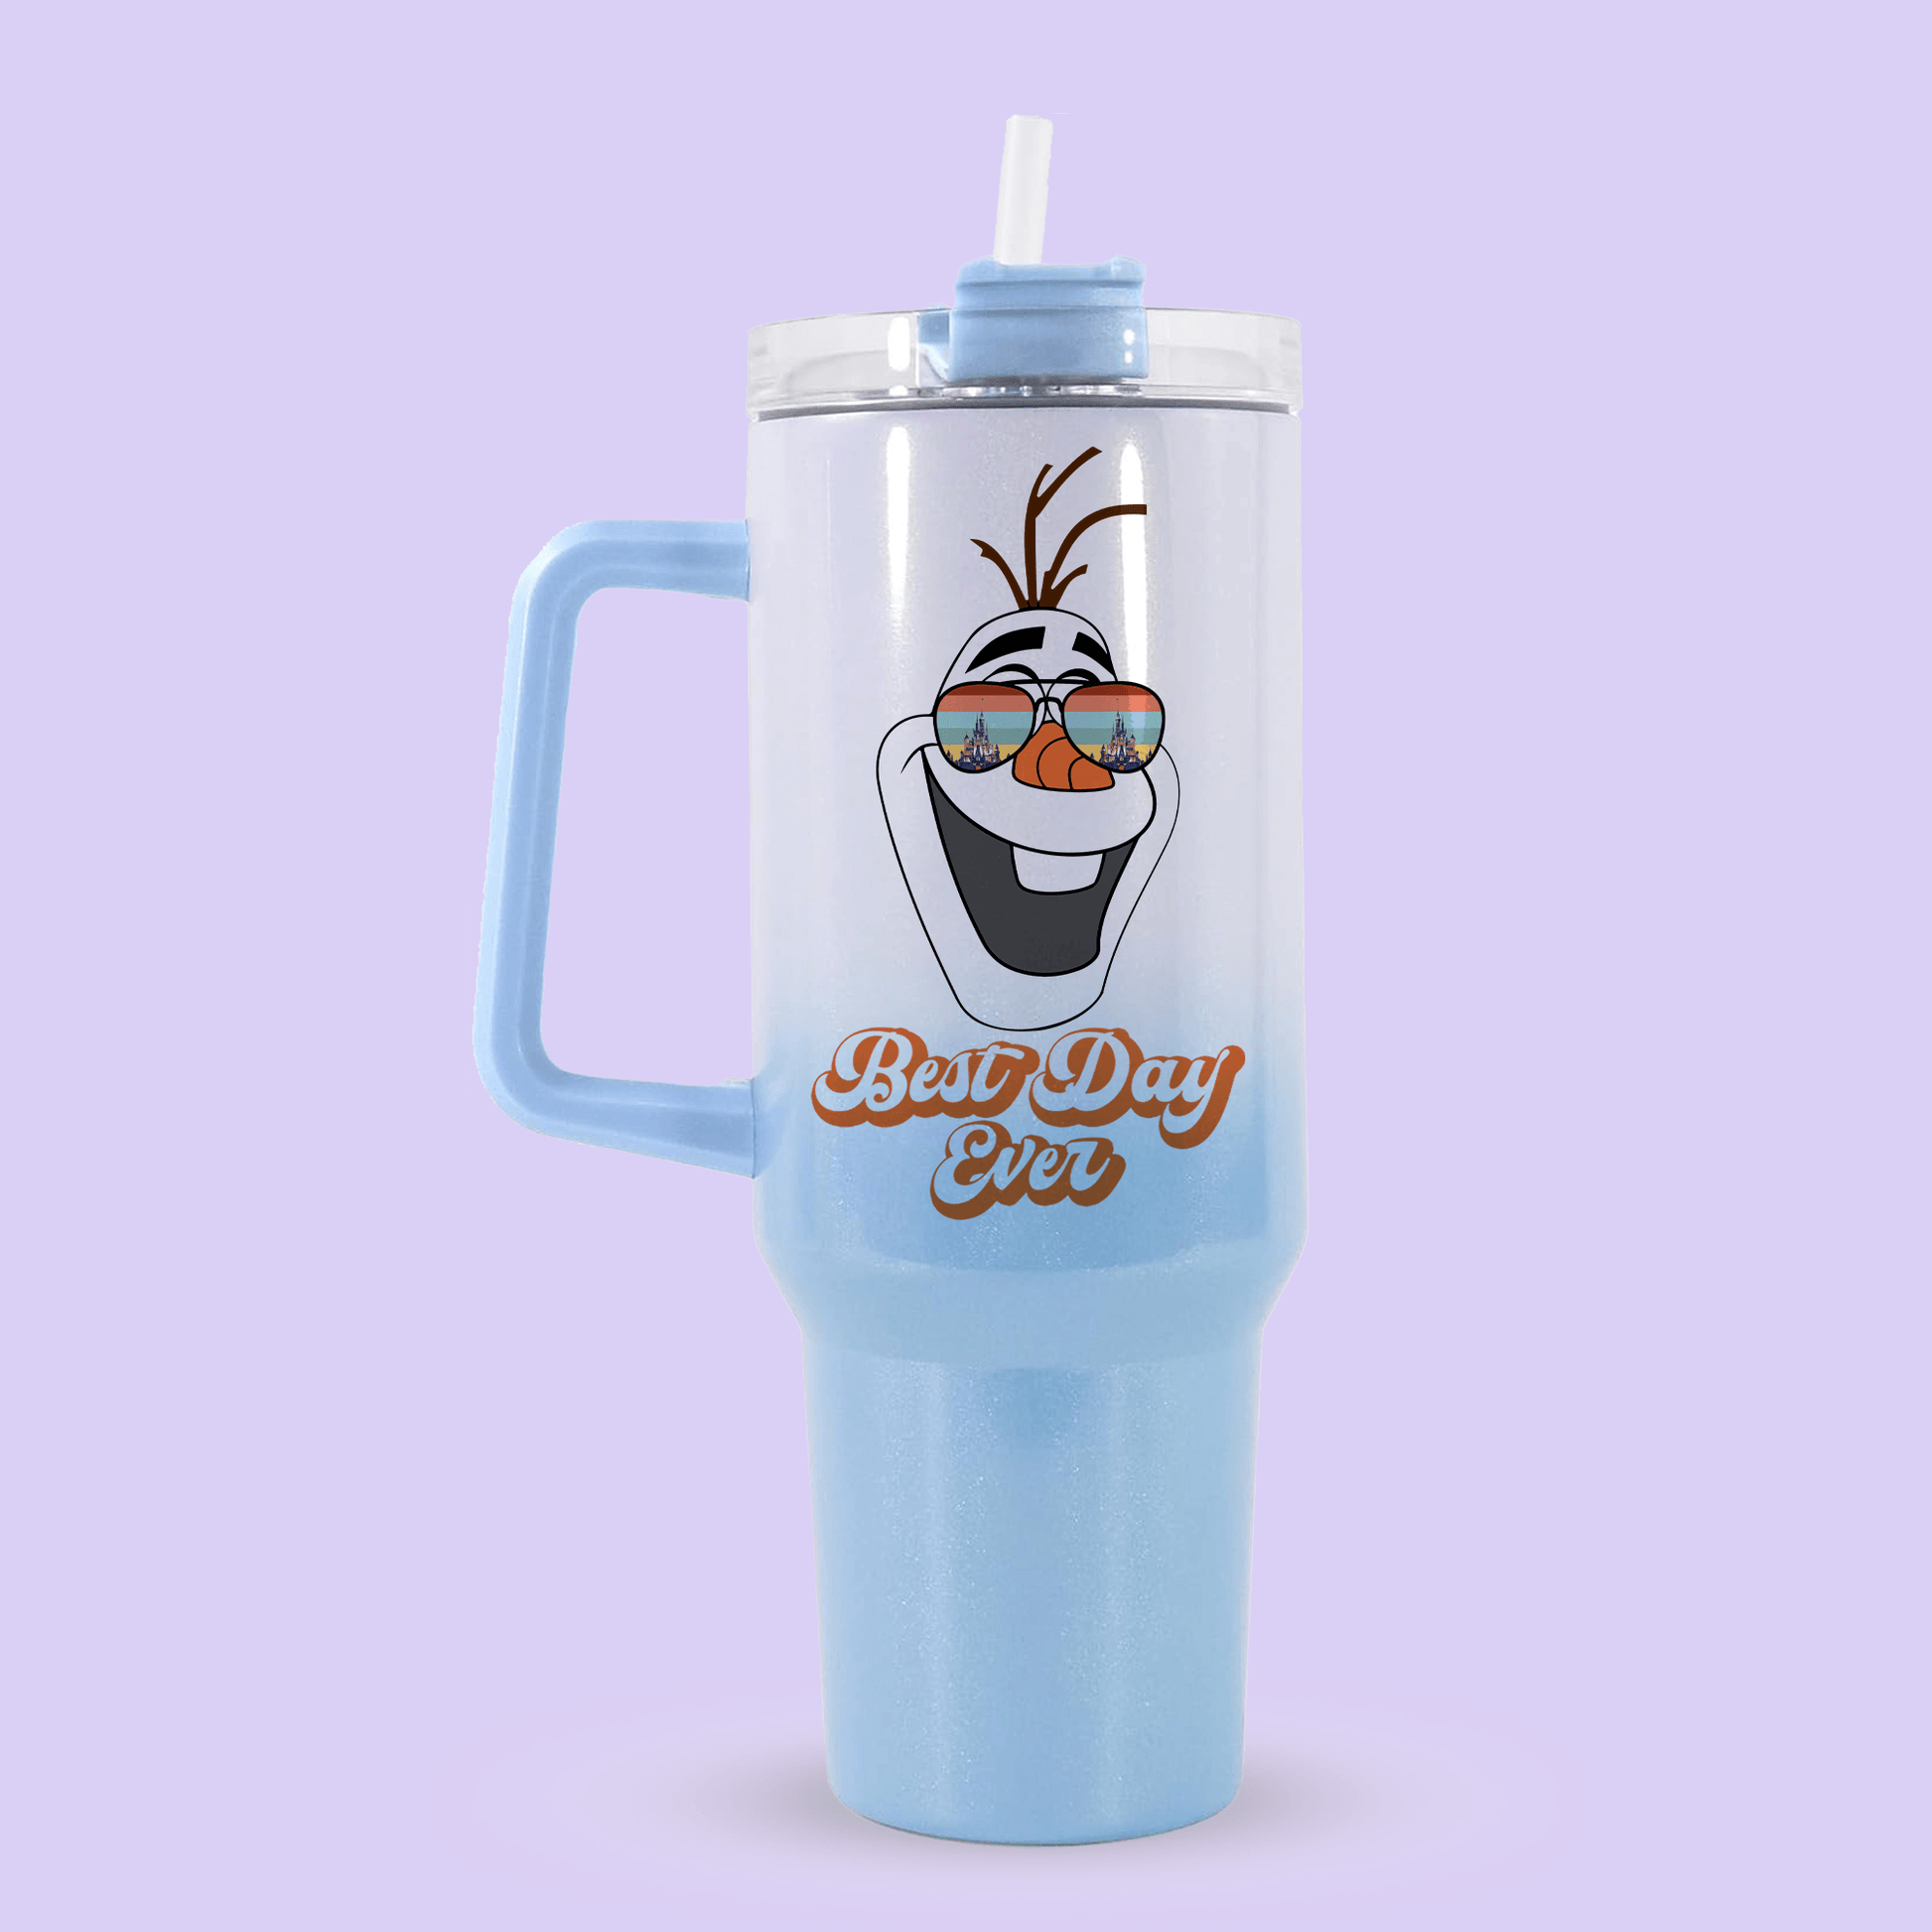 Disney Frozen Best Day Ever 40oz Quencher Tumbler - Olaf - Two Crafty Gays